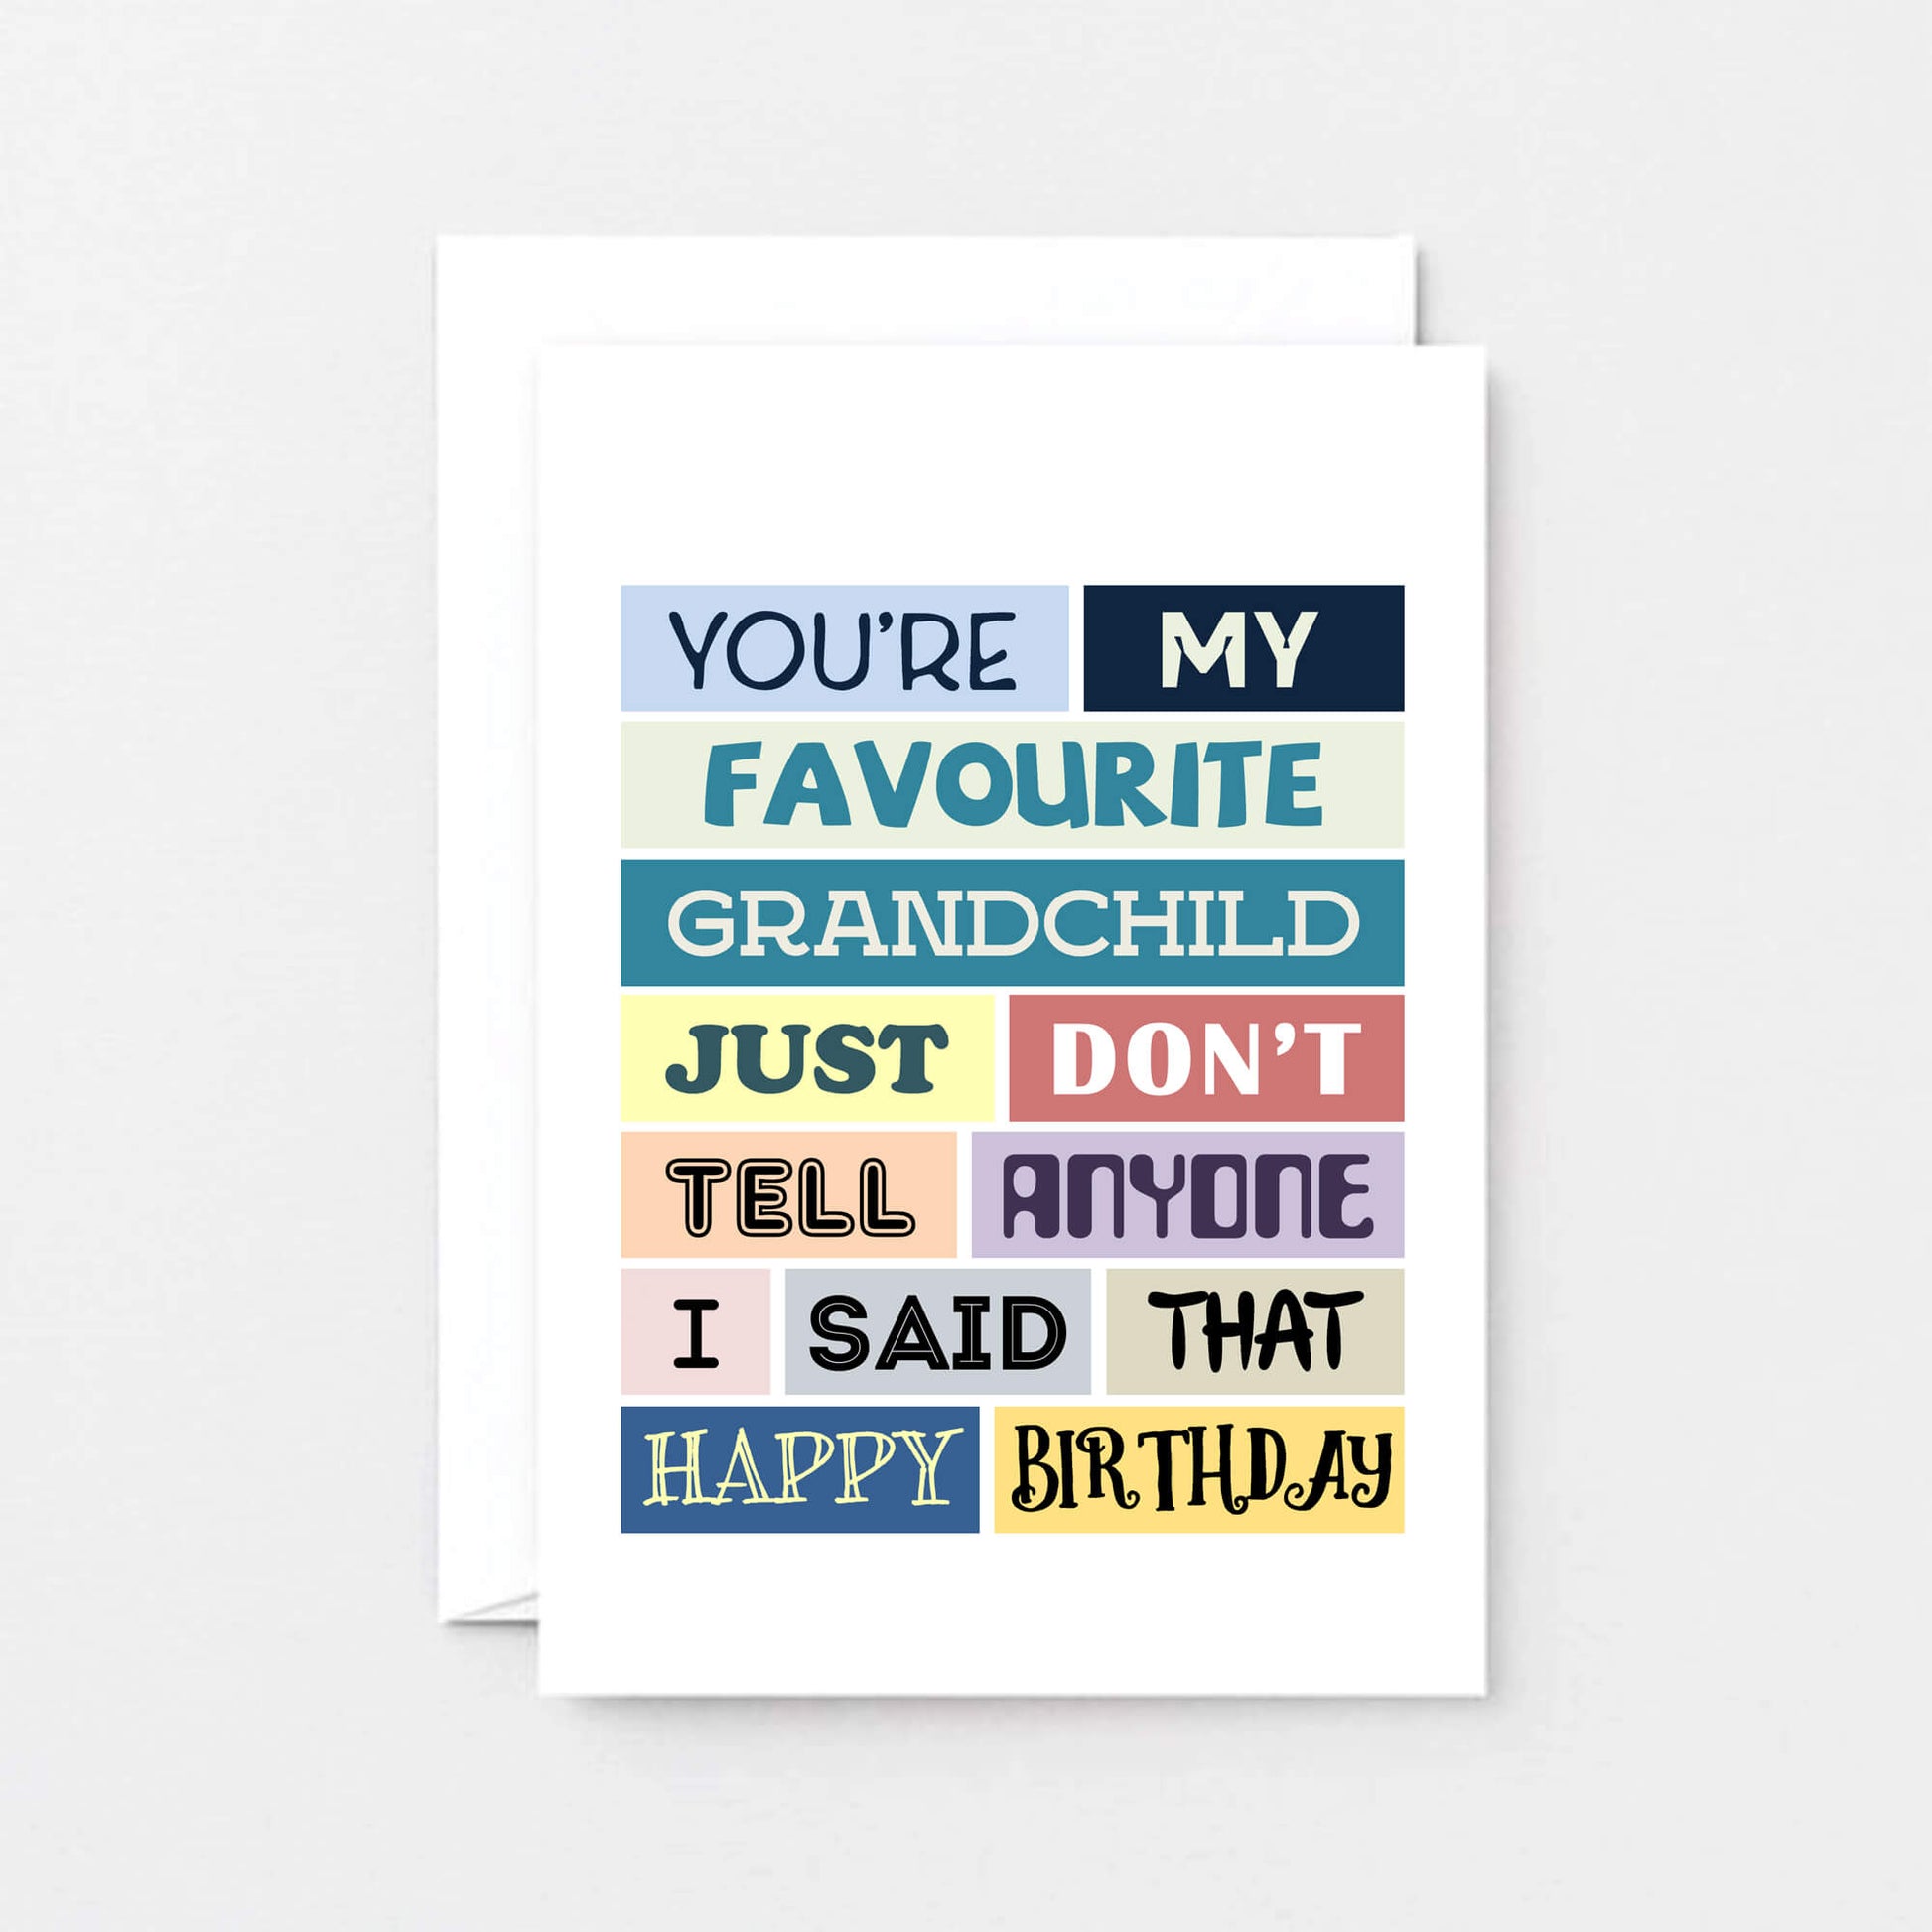 Grandchild Birthday Card by SixElevenCreations. Reads You're my favourite grandchild. Just don't tell anyone I said that. Happy birthday.